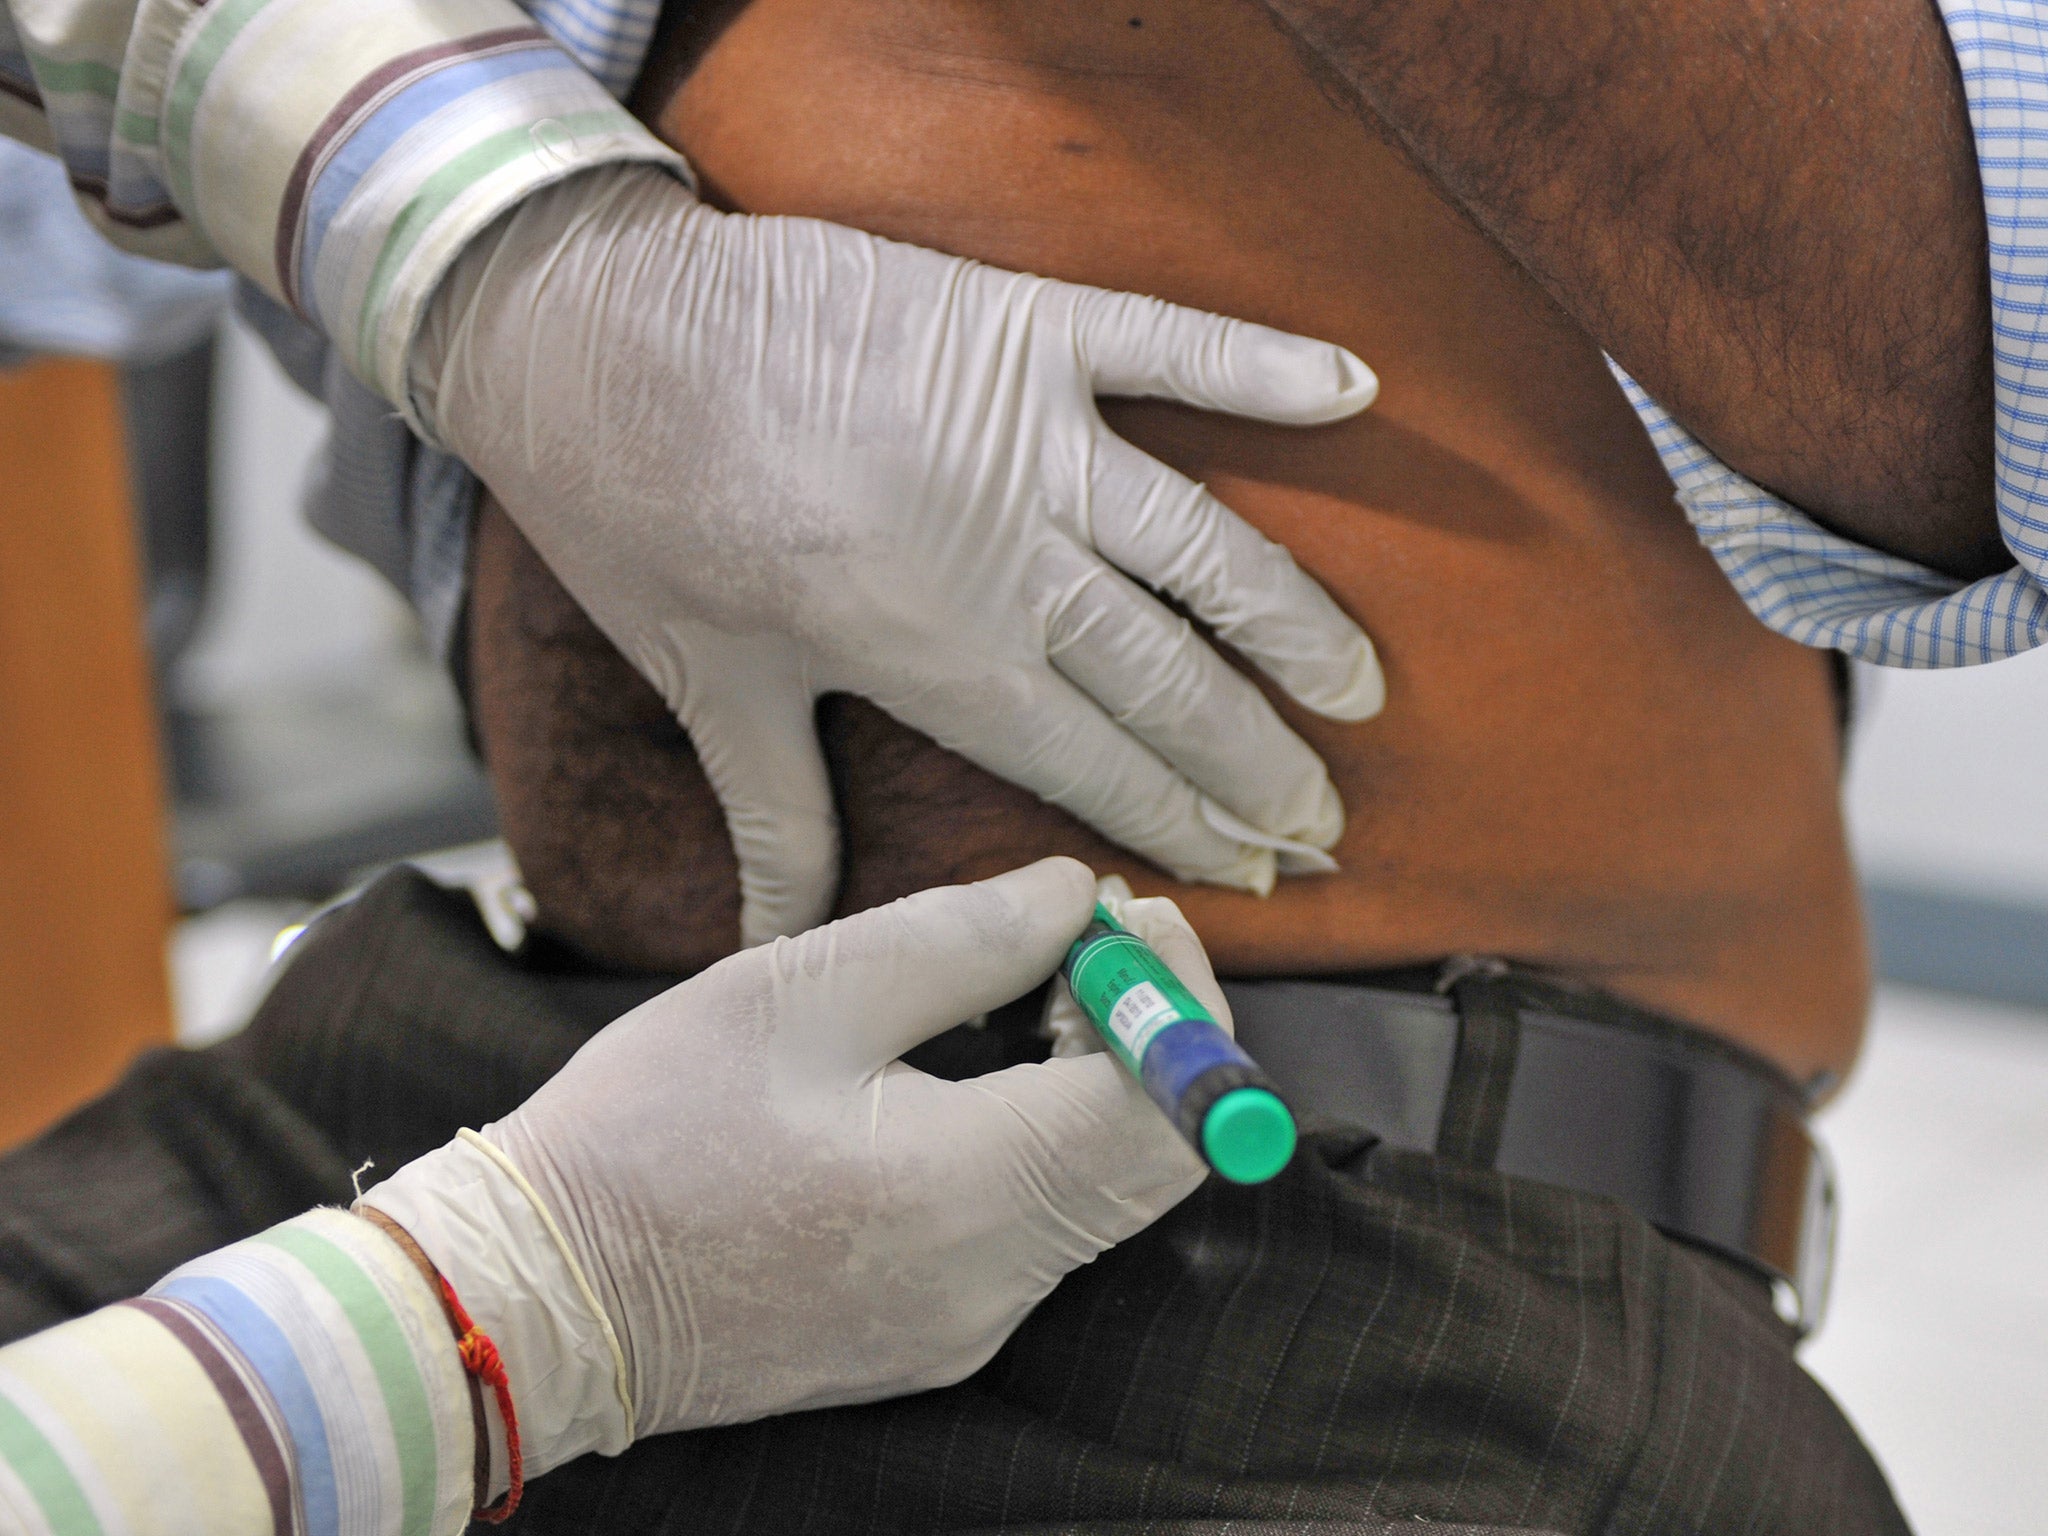 An insulin shot is administered to a diabetes patient (Getty)